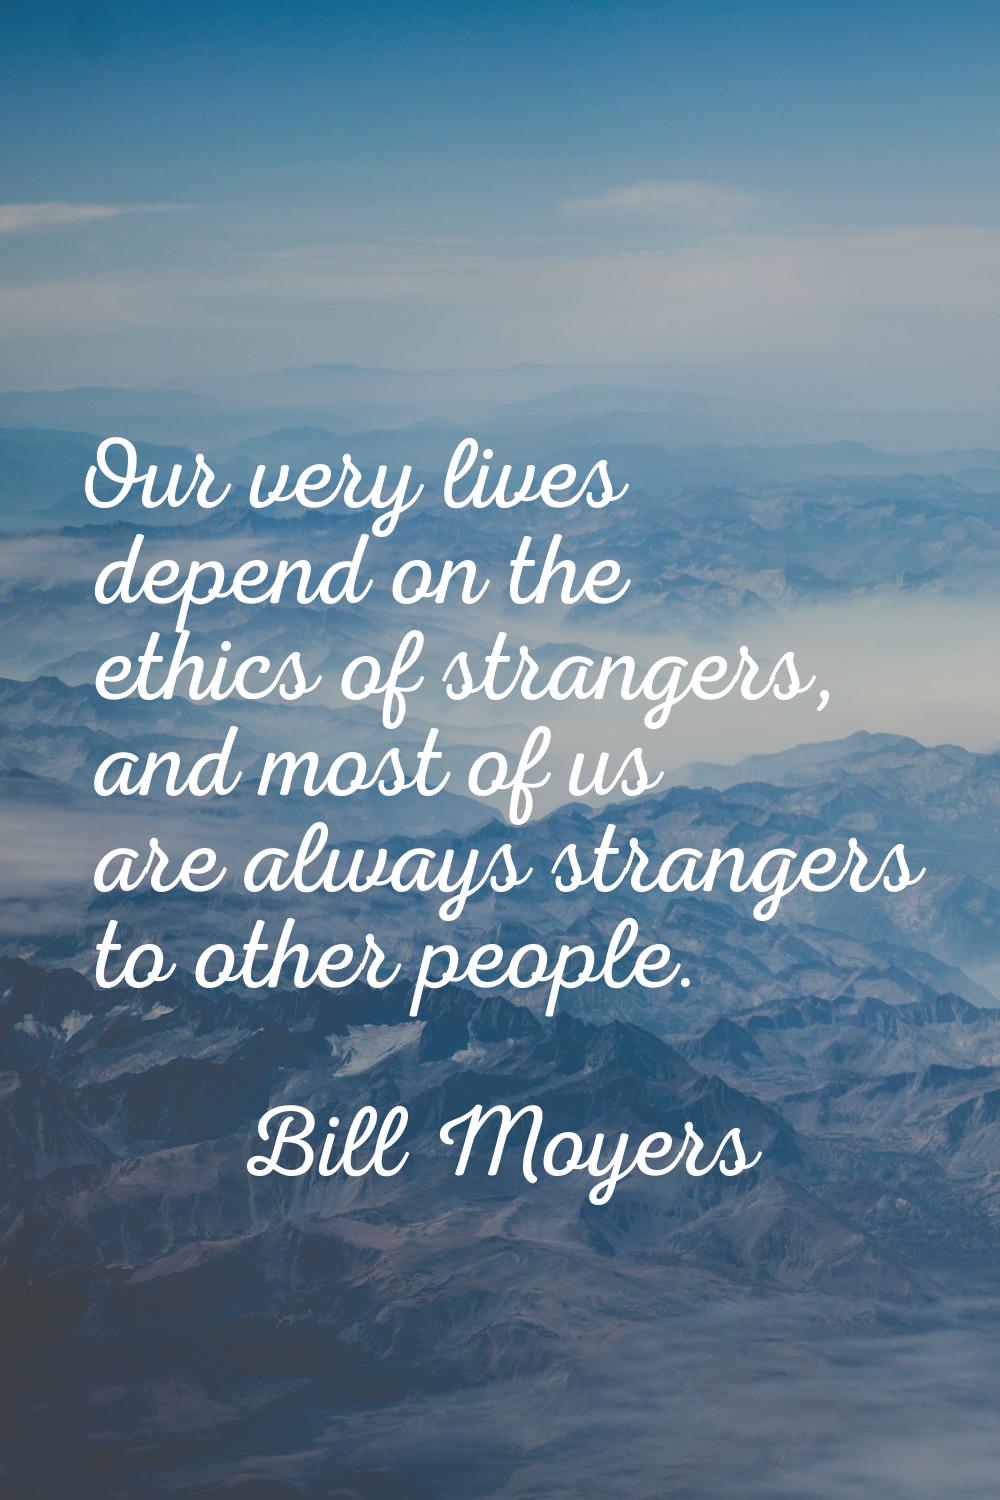 Our very lives depend on the ethics of strangers, and most of us are always strangers to other peop